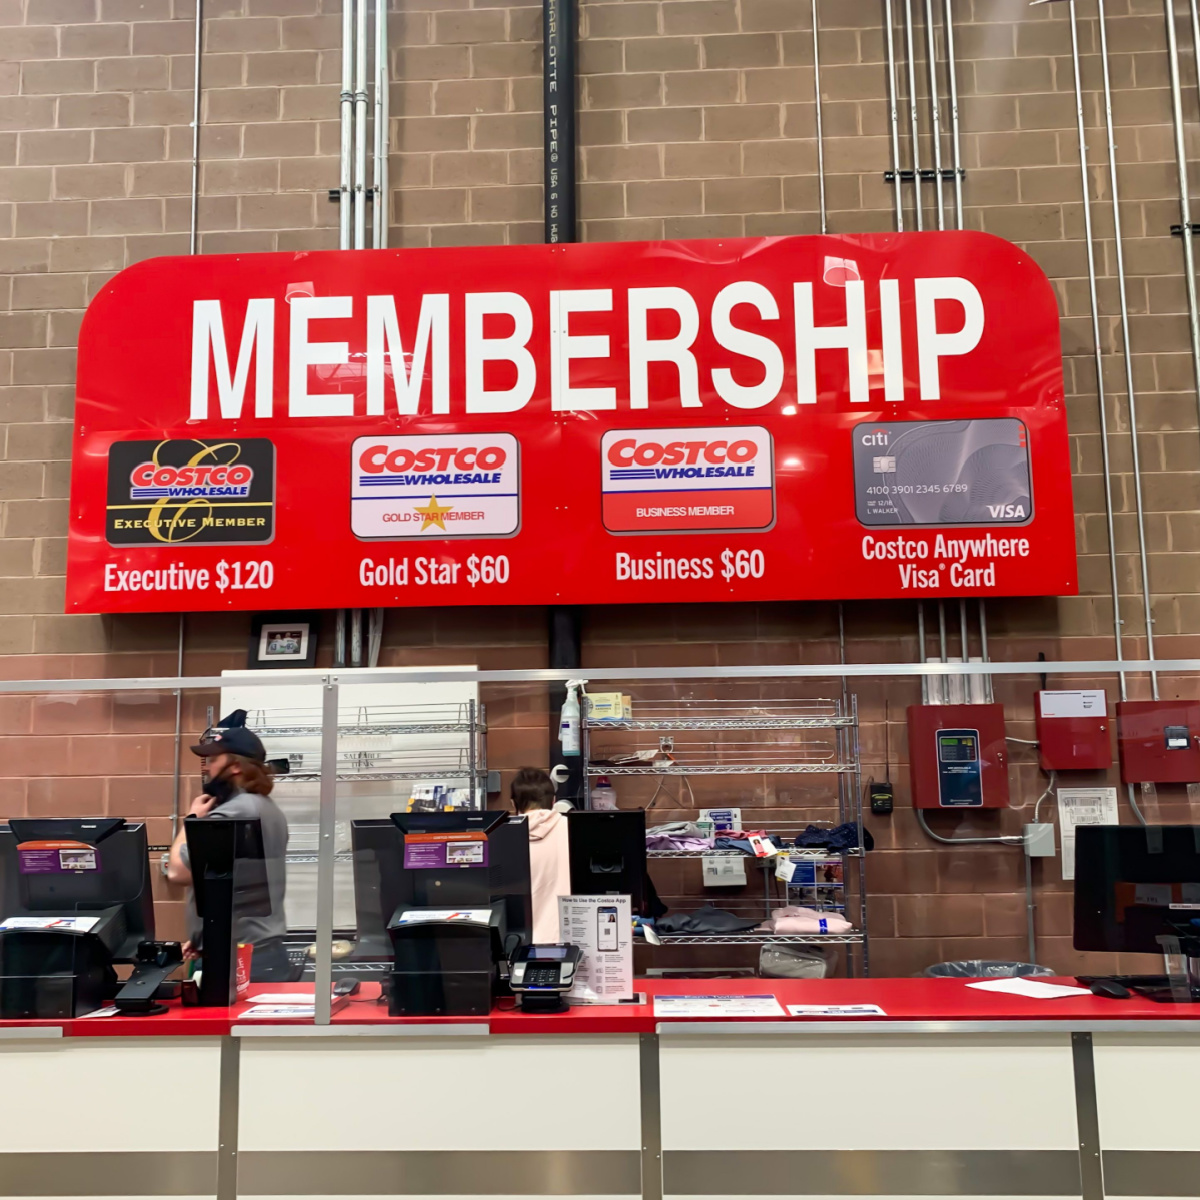 costco-just-confirmed-they-will-raise-membership-prices-say-it-ain-t-so